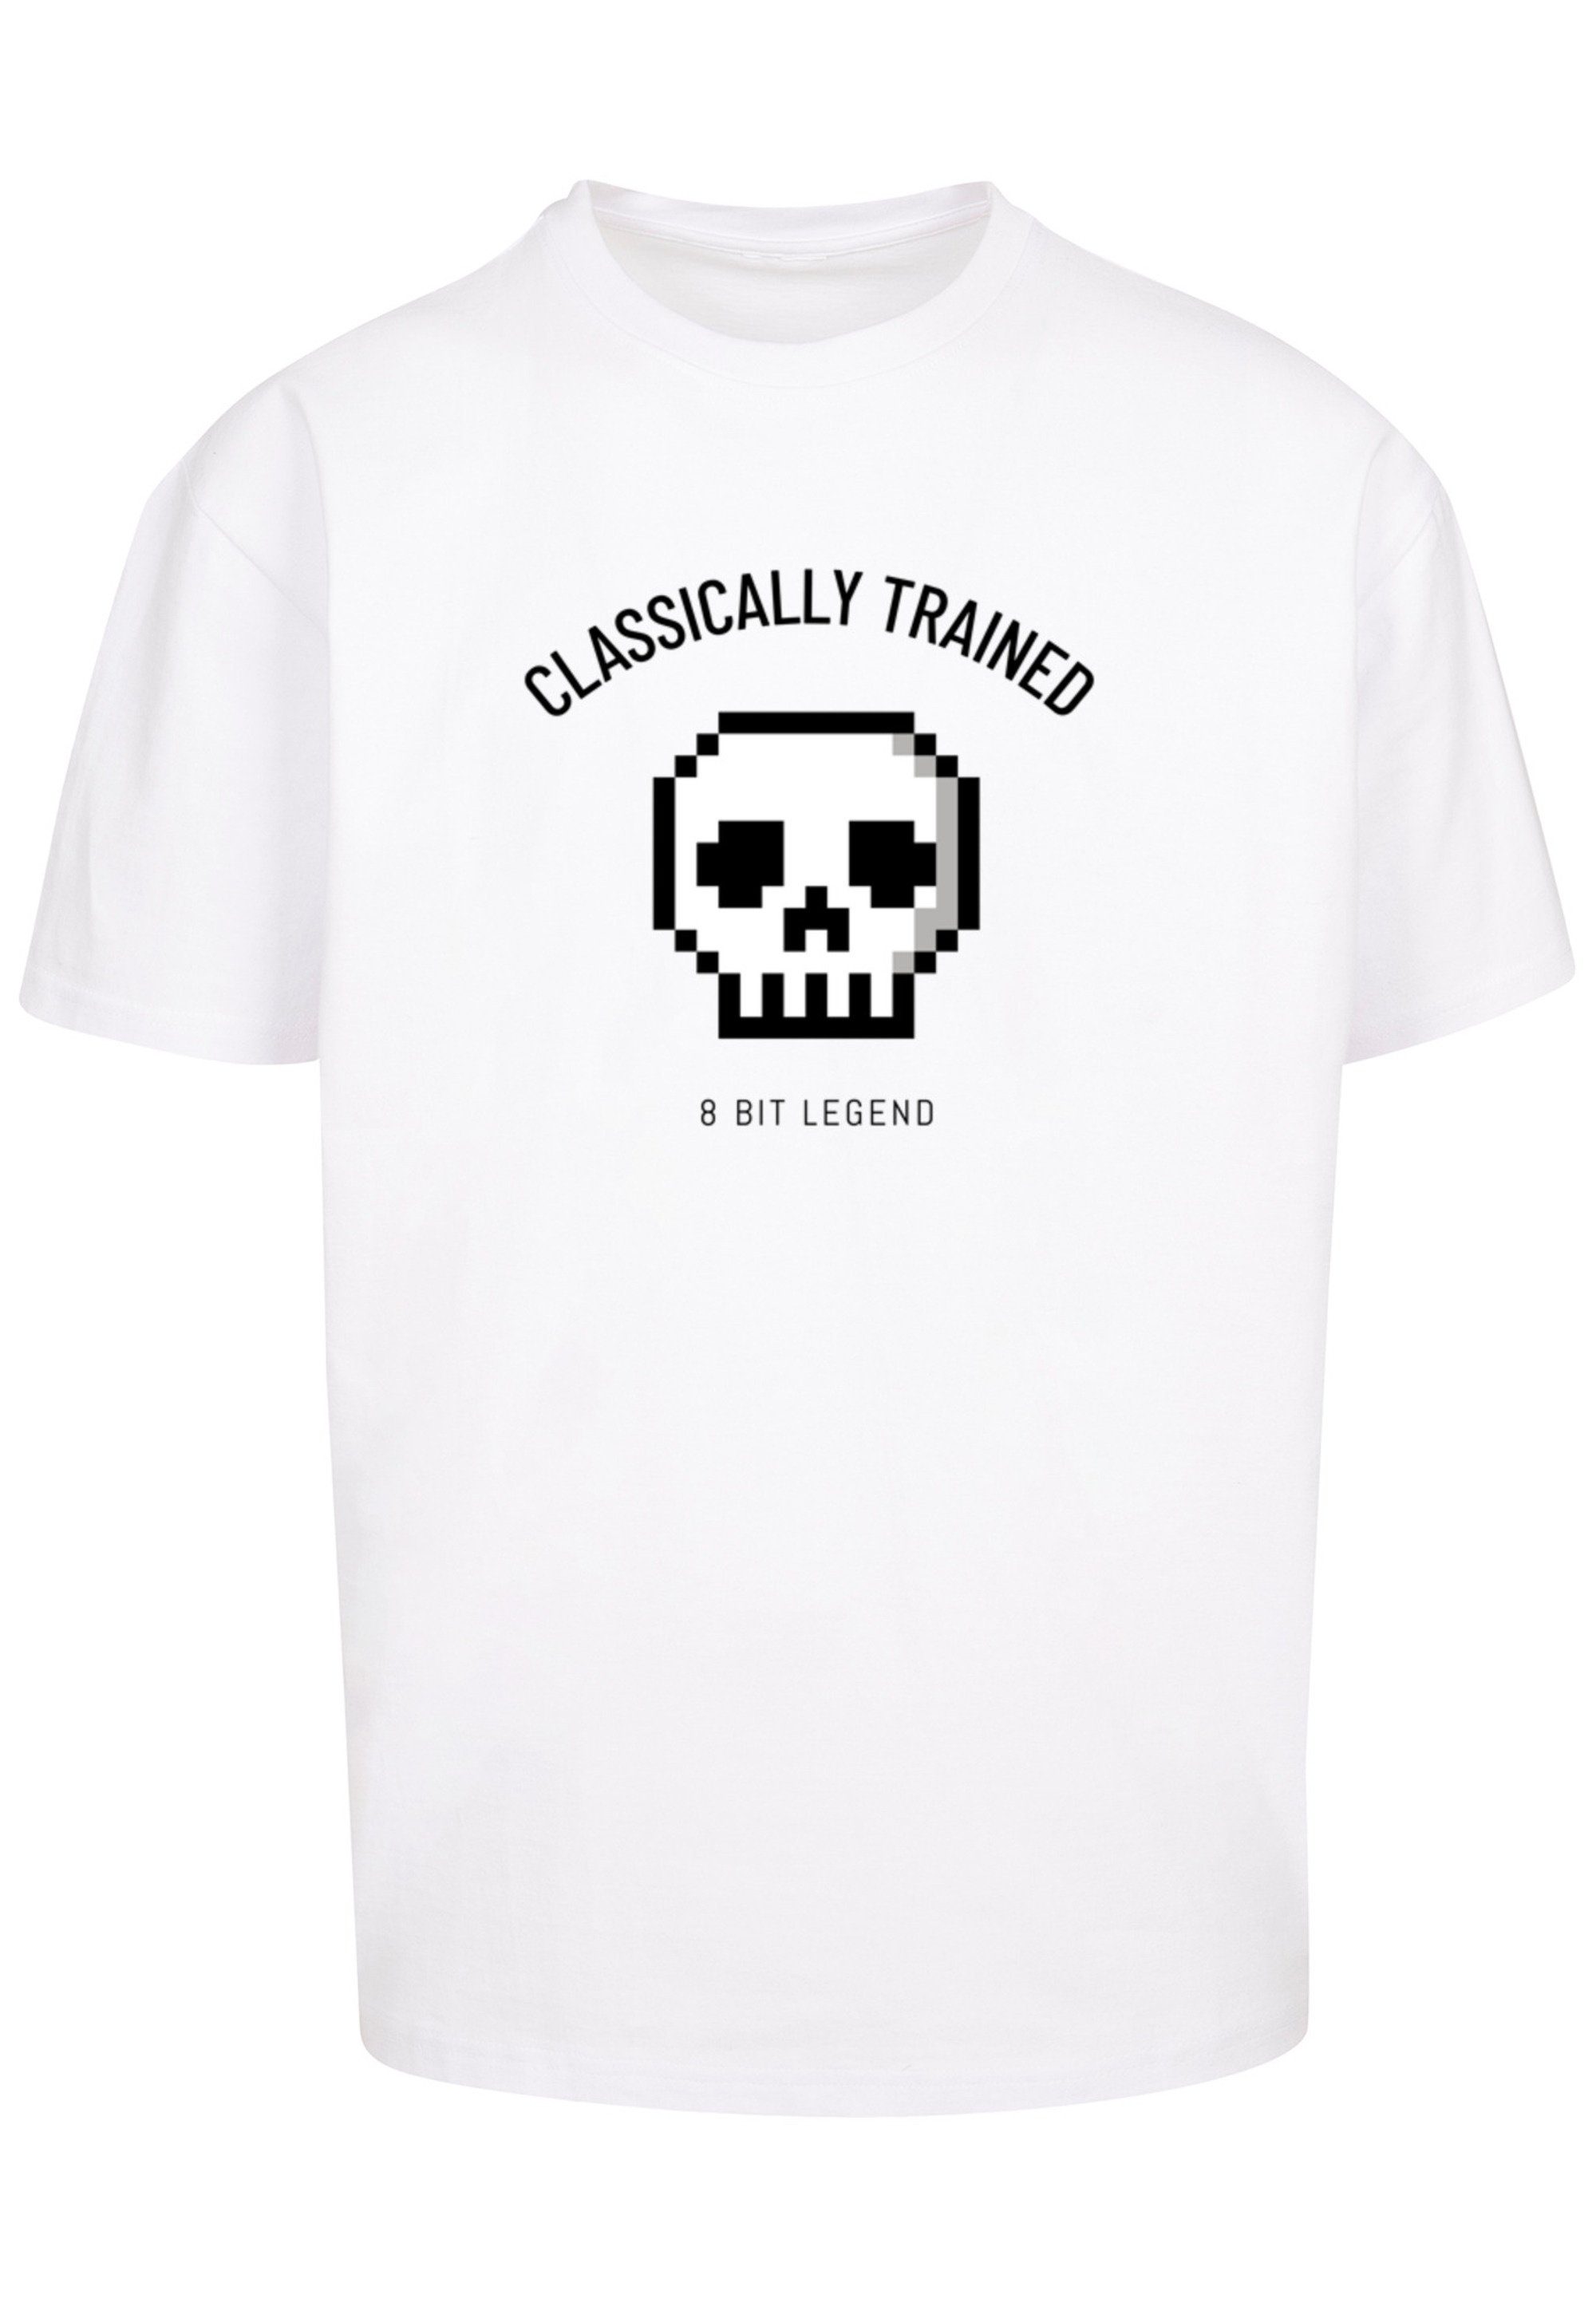 Trained Gaming F4NT4STIC SEVENSQUARED Print Classically weiß T-Shirt Retro